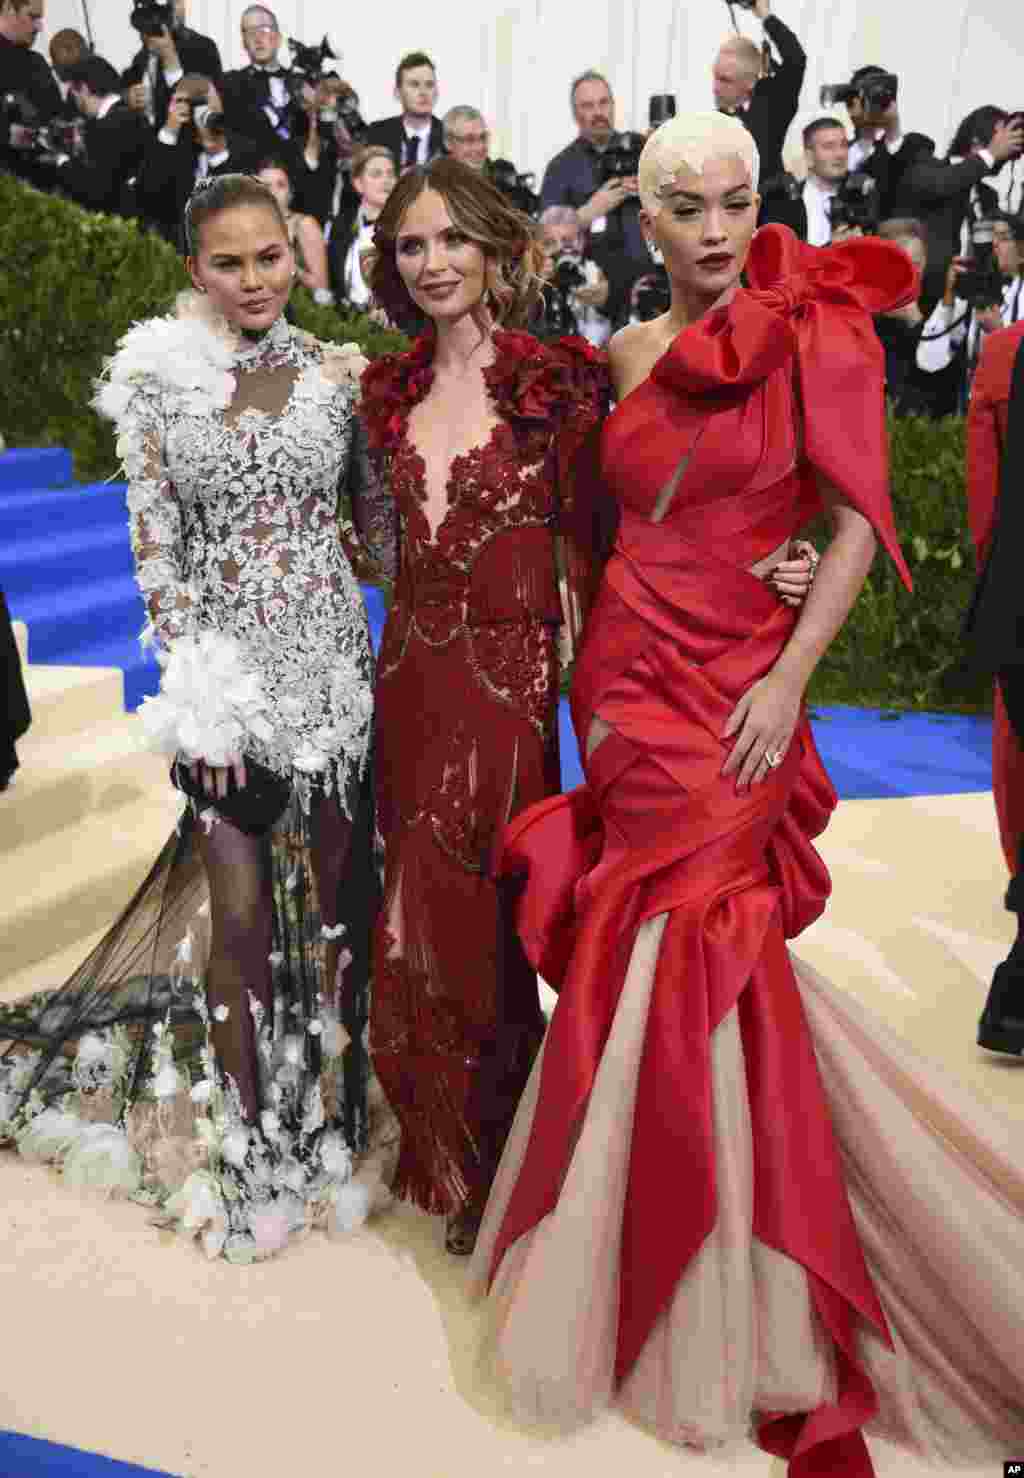 Chrissy Teigen, from left, Georgina Chapman and Rita Ora attend The Metropolitan Museum of Art's Costume Institute benefit gala celebrating the opening of the Rei Kawakubo/Comme des Garçons: Art of the In-Between exhibition on May 1, 2017, in New York.